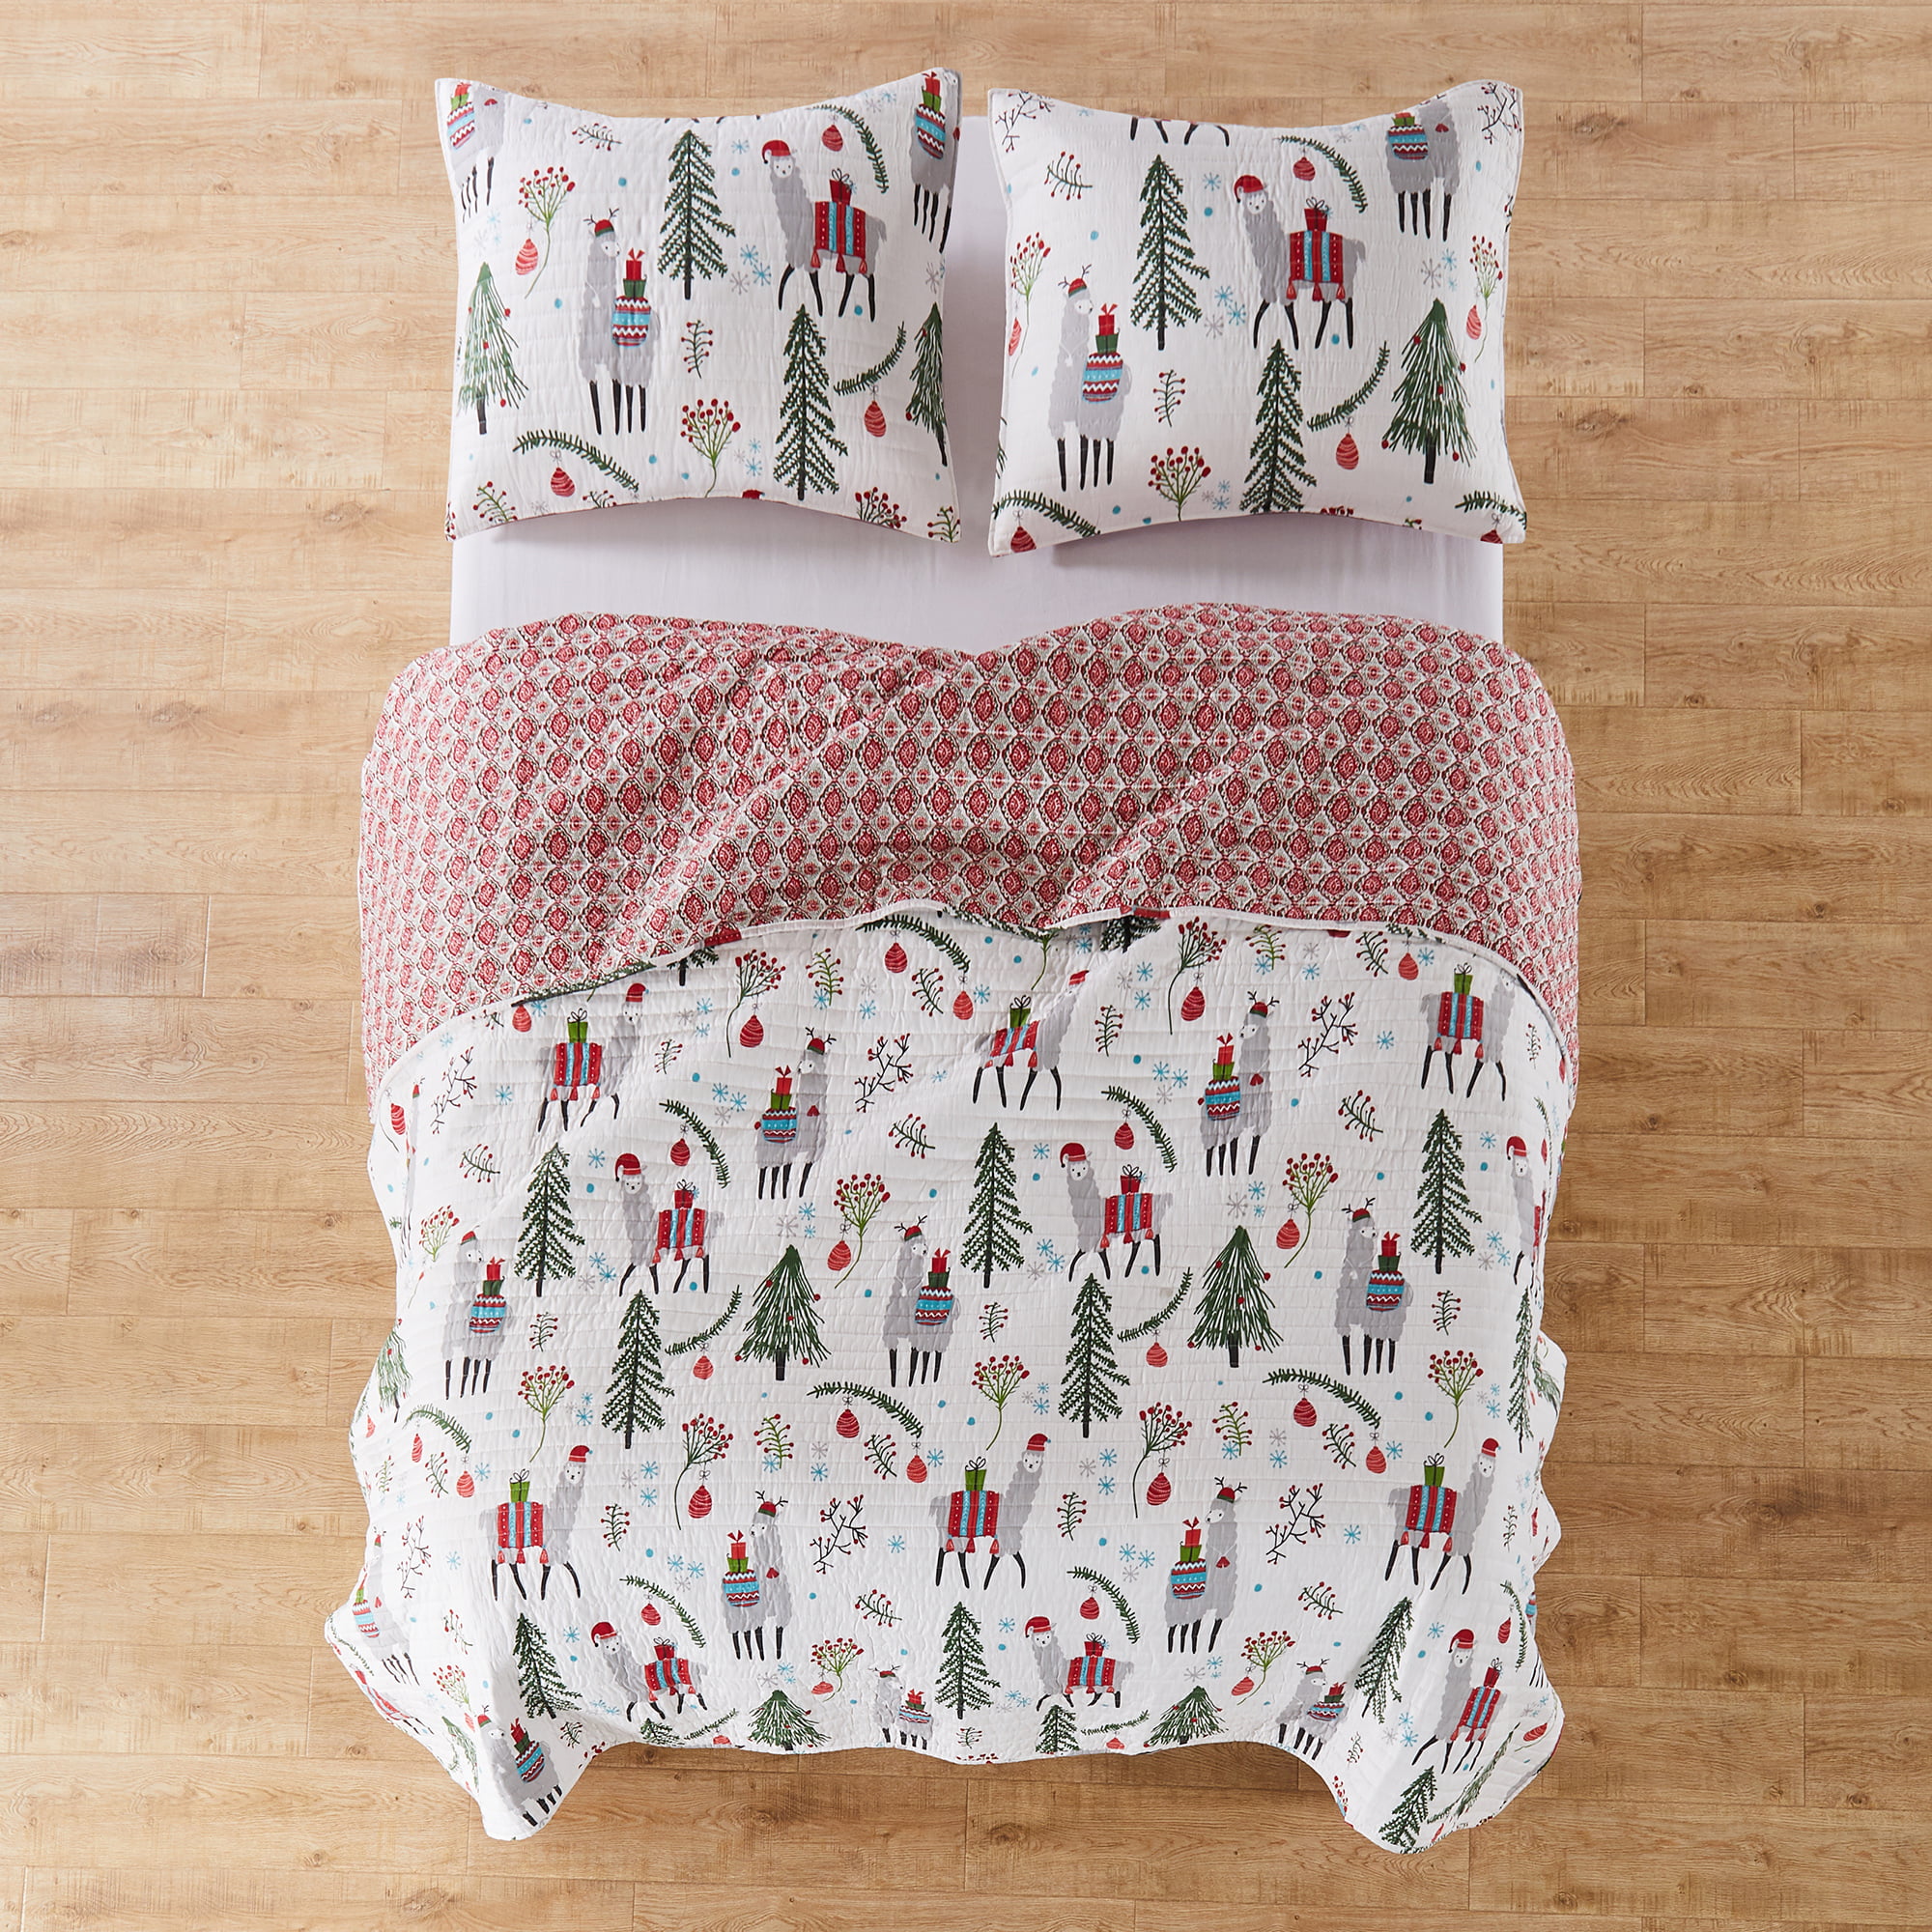 Merry & Bright by Levtex Home - Fa La La Llama Quilt Set - King Quilt  (106x92in.) + Two King Pillow Sham (20x36in.) - Red, Green, Grey, Blue, and  White - Reversible - Polyester Blend